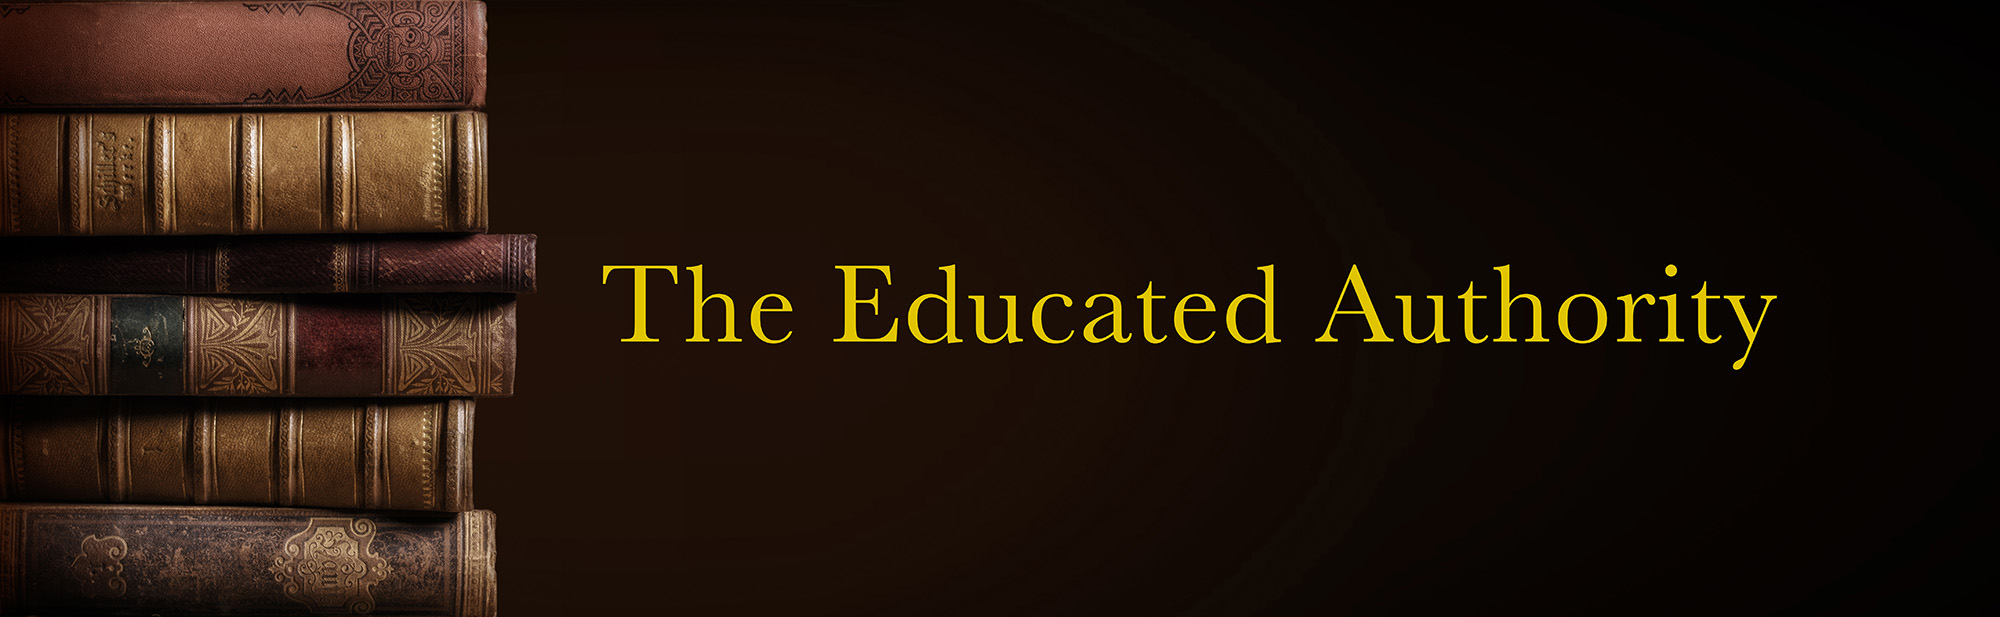 The Educated Authority